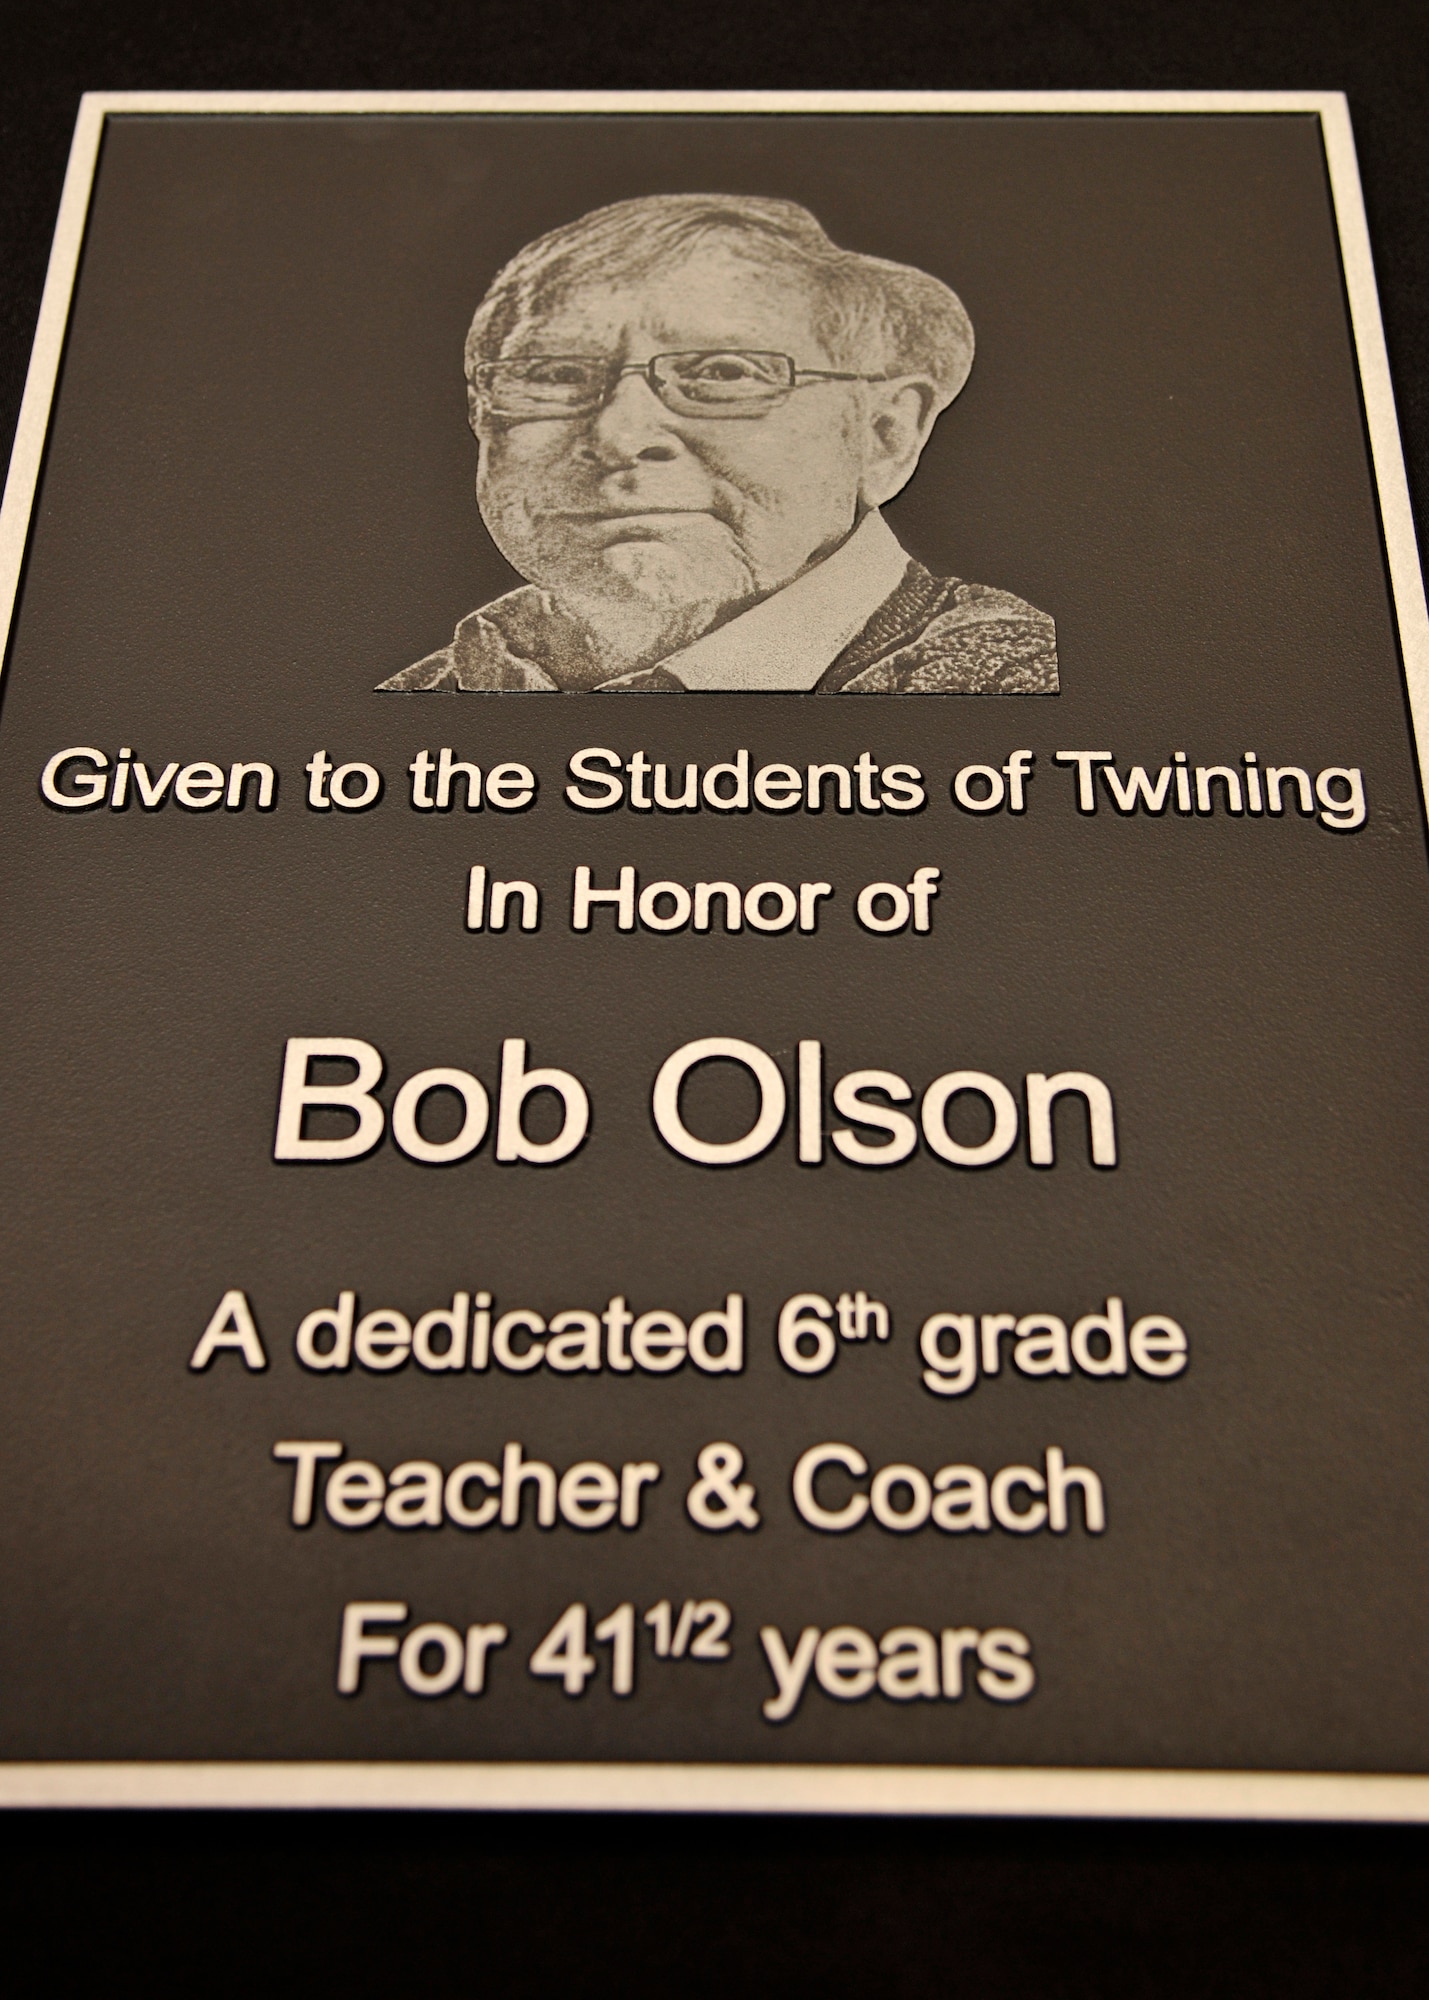 A plaque remembering Robert “Bob” Olson, teacher and coach at Nathan F. Twining Elementary and Middle School, was dedicated on May 18, 2015, on Grand Forks Air Force Base, N.D. Olson joined the Army Reserves in 1963 and after, he started teaching students and coached seventh and eighth grade football and track. Olson passed away on Oct. 15, 2014 at the age of 69 while battling prostate cancer.  (U.S. Air Force photo by Senior Airman Xavier Navarro/released)